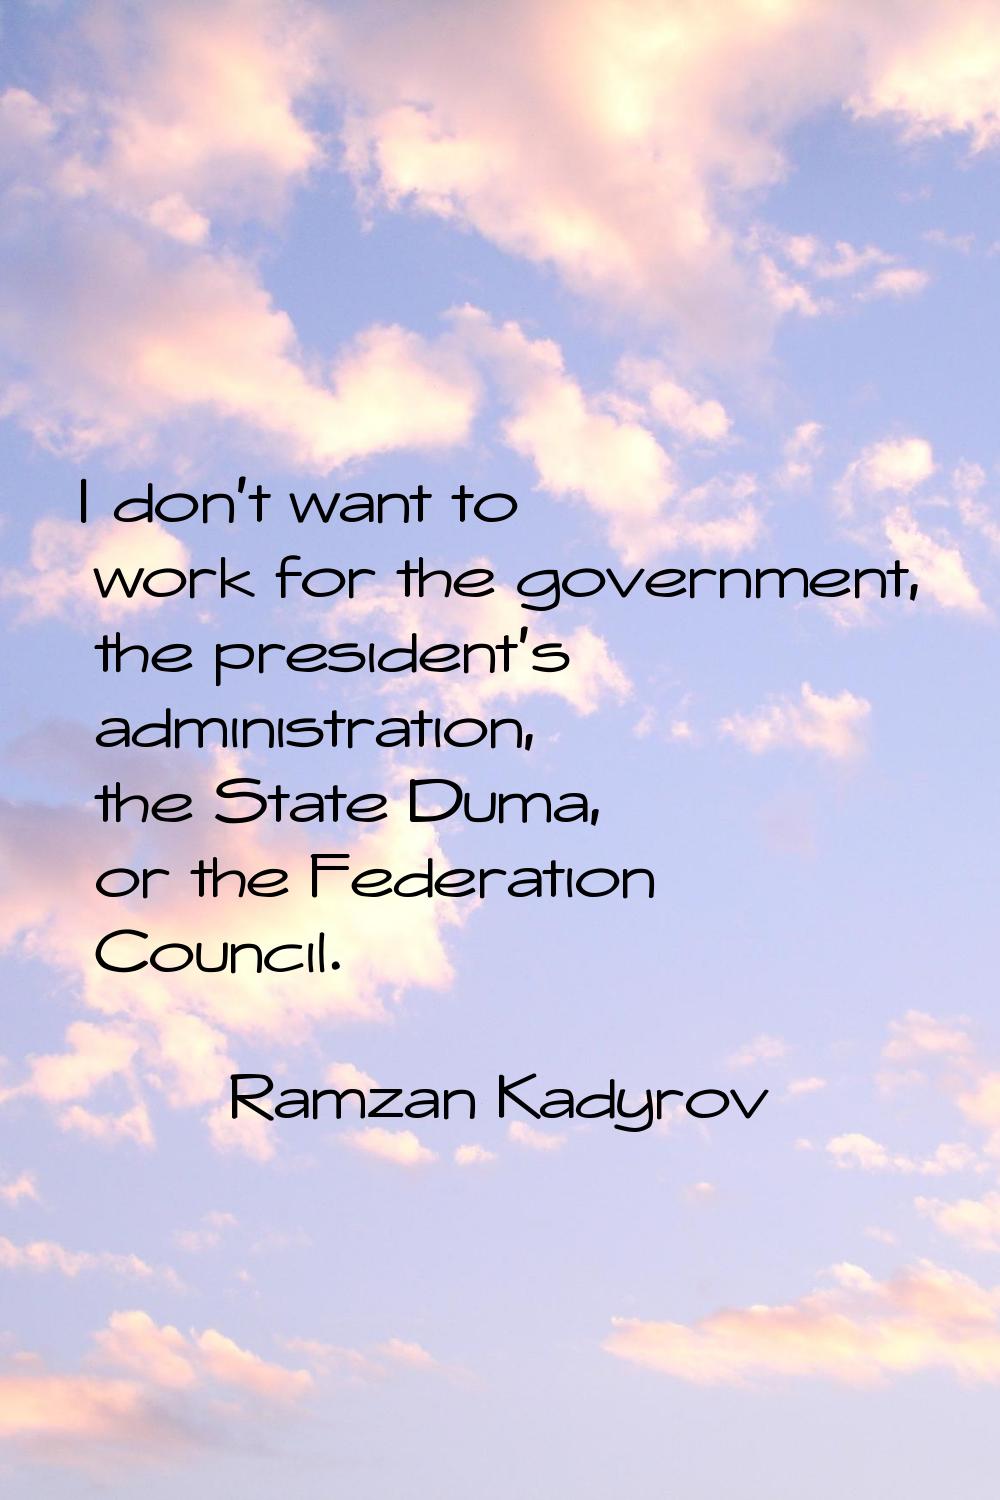 I don't want to work for the government, the president's administration, the State Duma, or the Fed